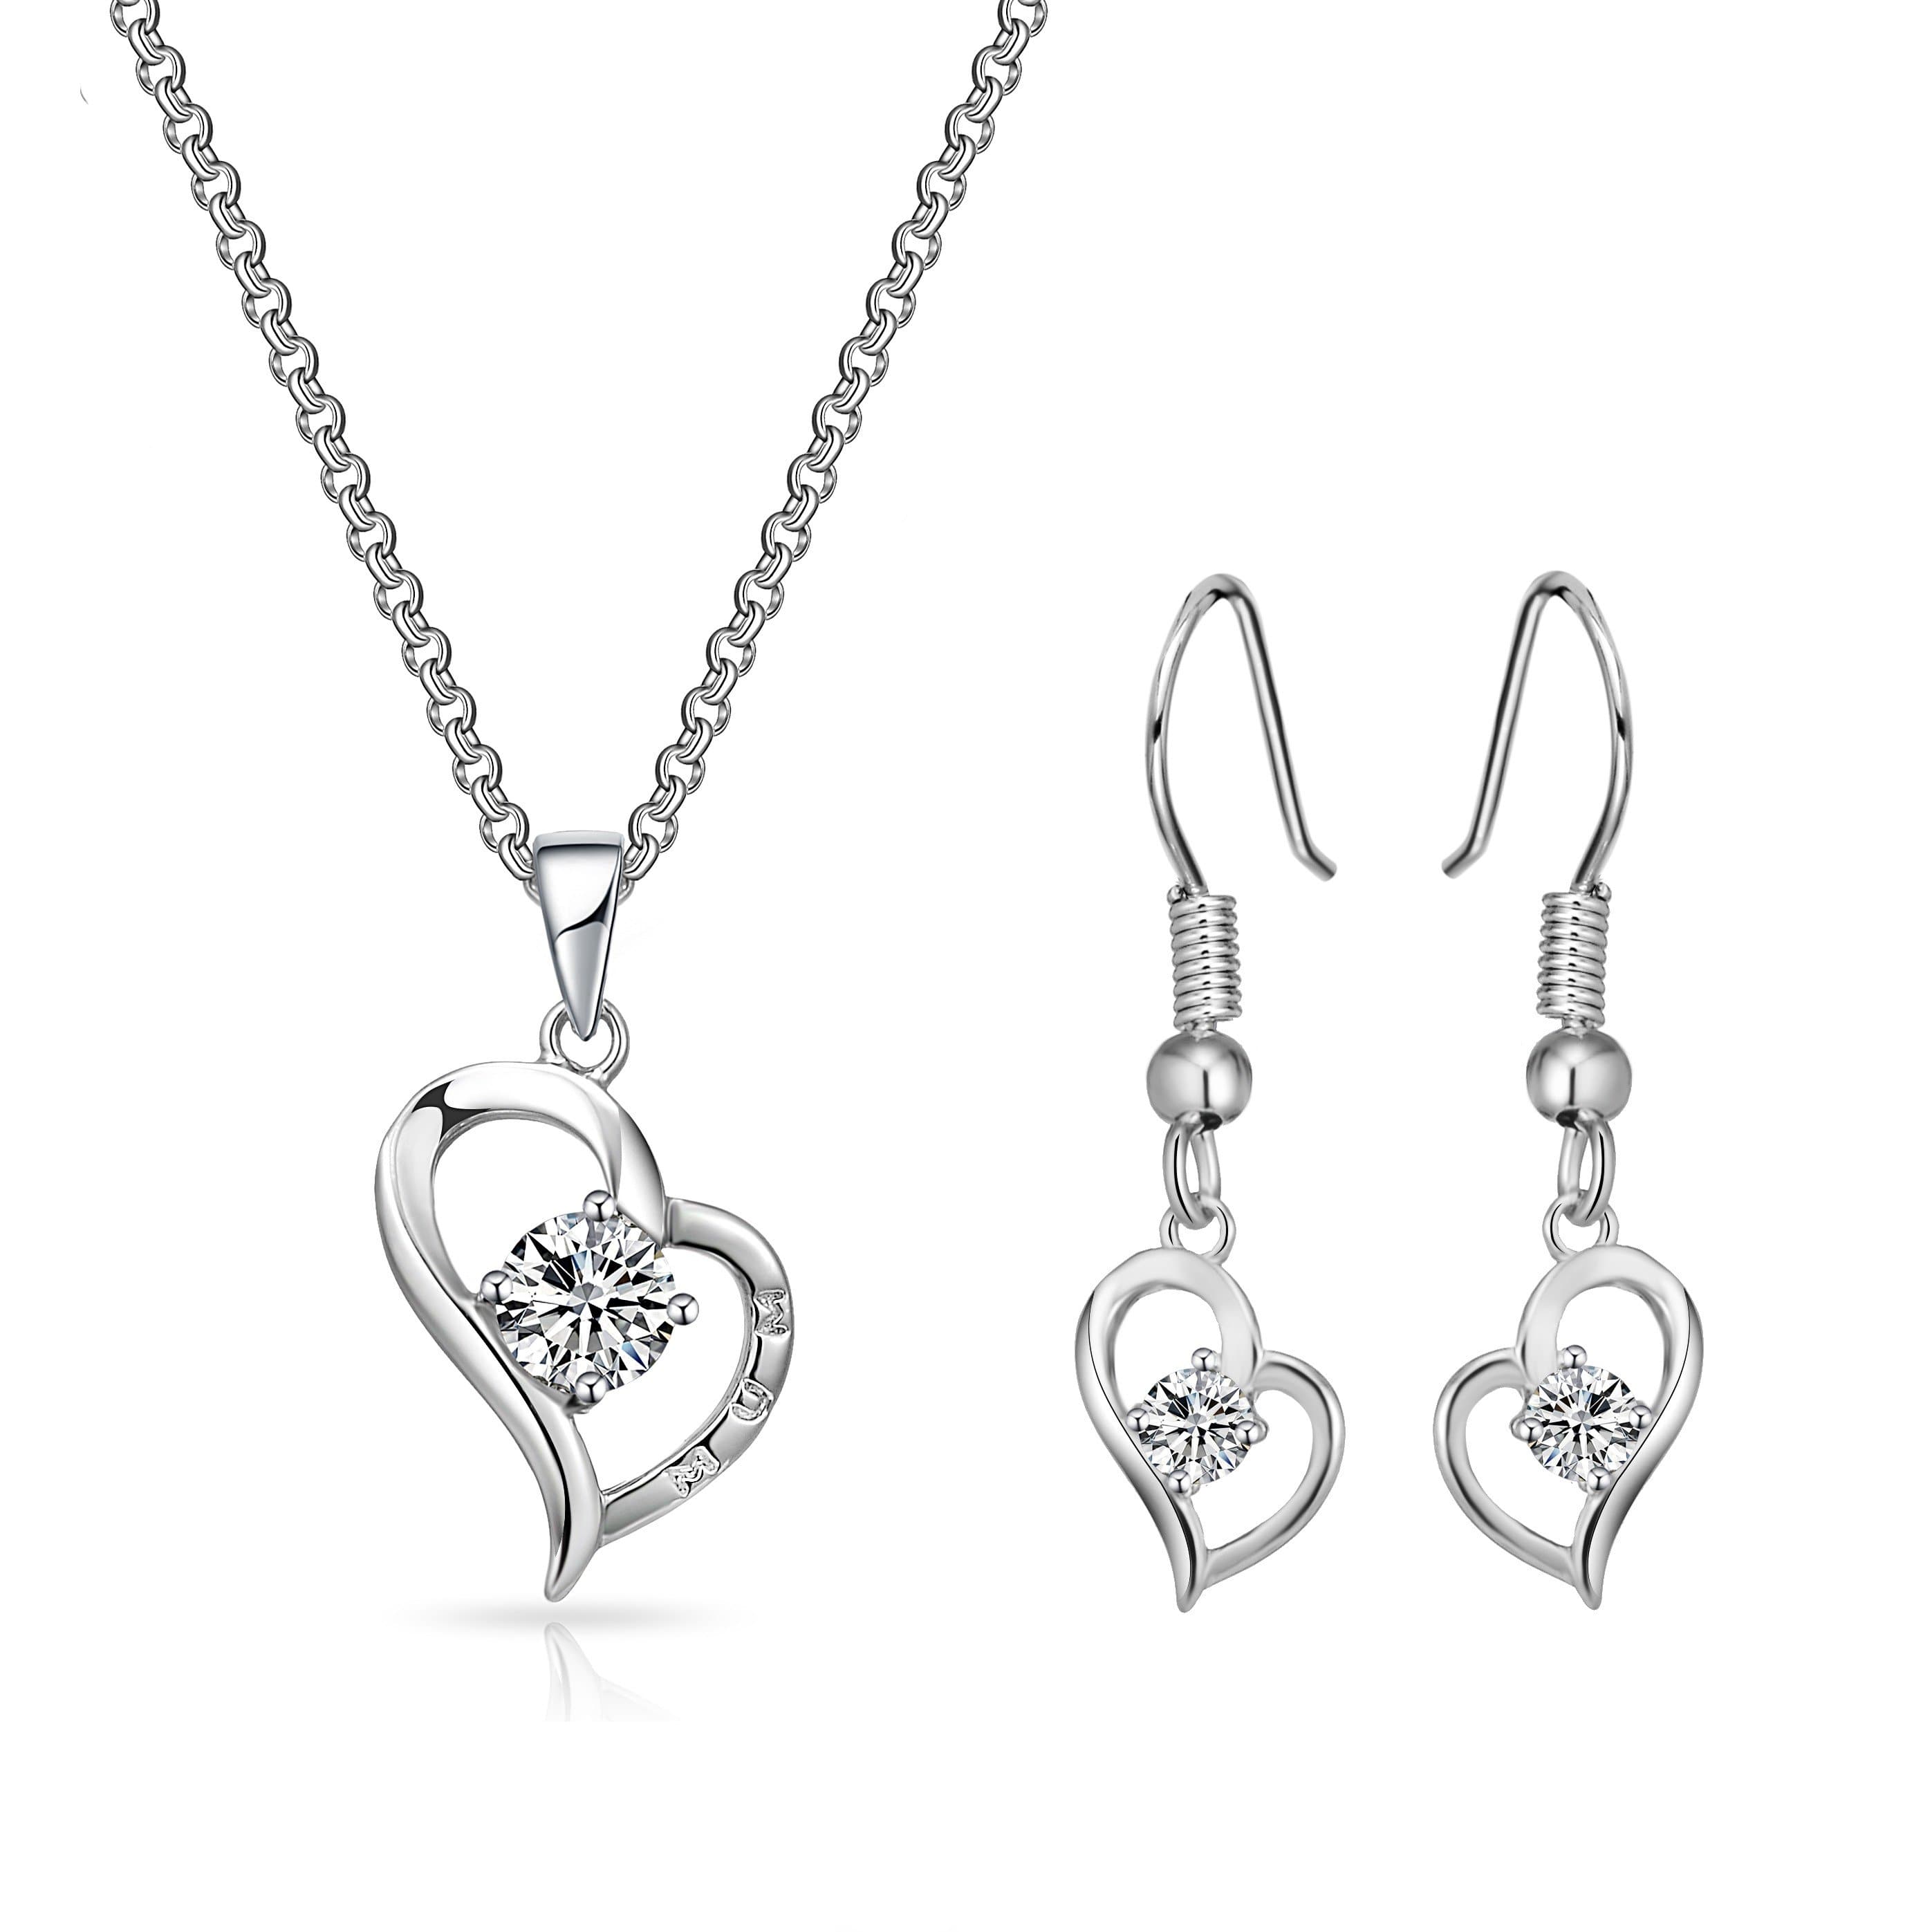 Heart "Mum" Necklace and Earrings Set Created with Zircondia® Crystals by Philip Jones Jewellery